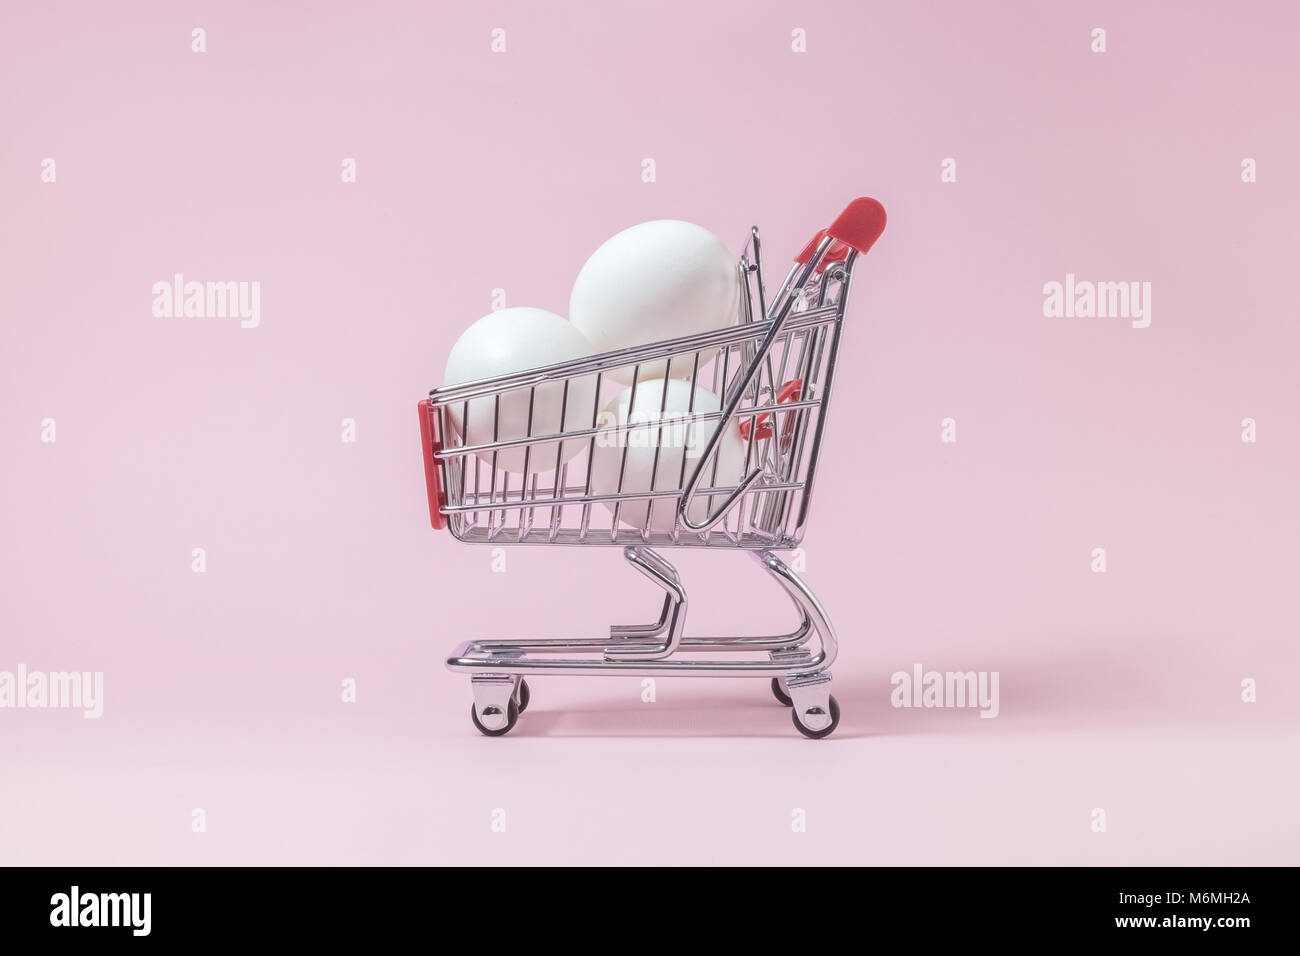 Shopping trolley model full of white eggs against pastel pink rose background minimal concept. Space for copy. Stock Photo